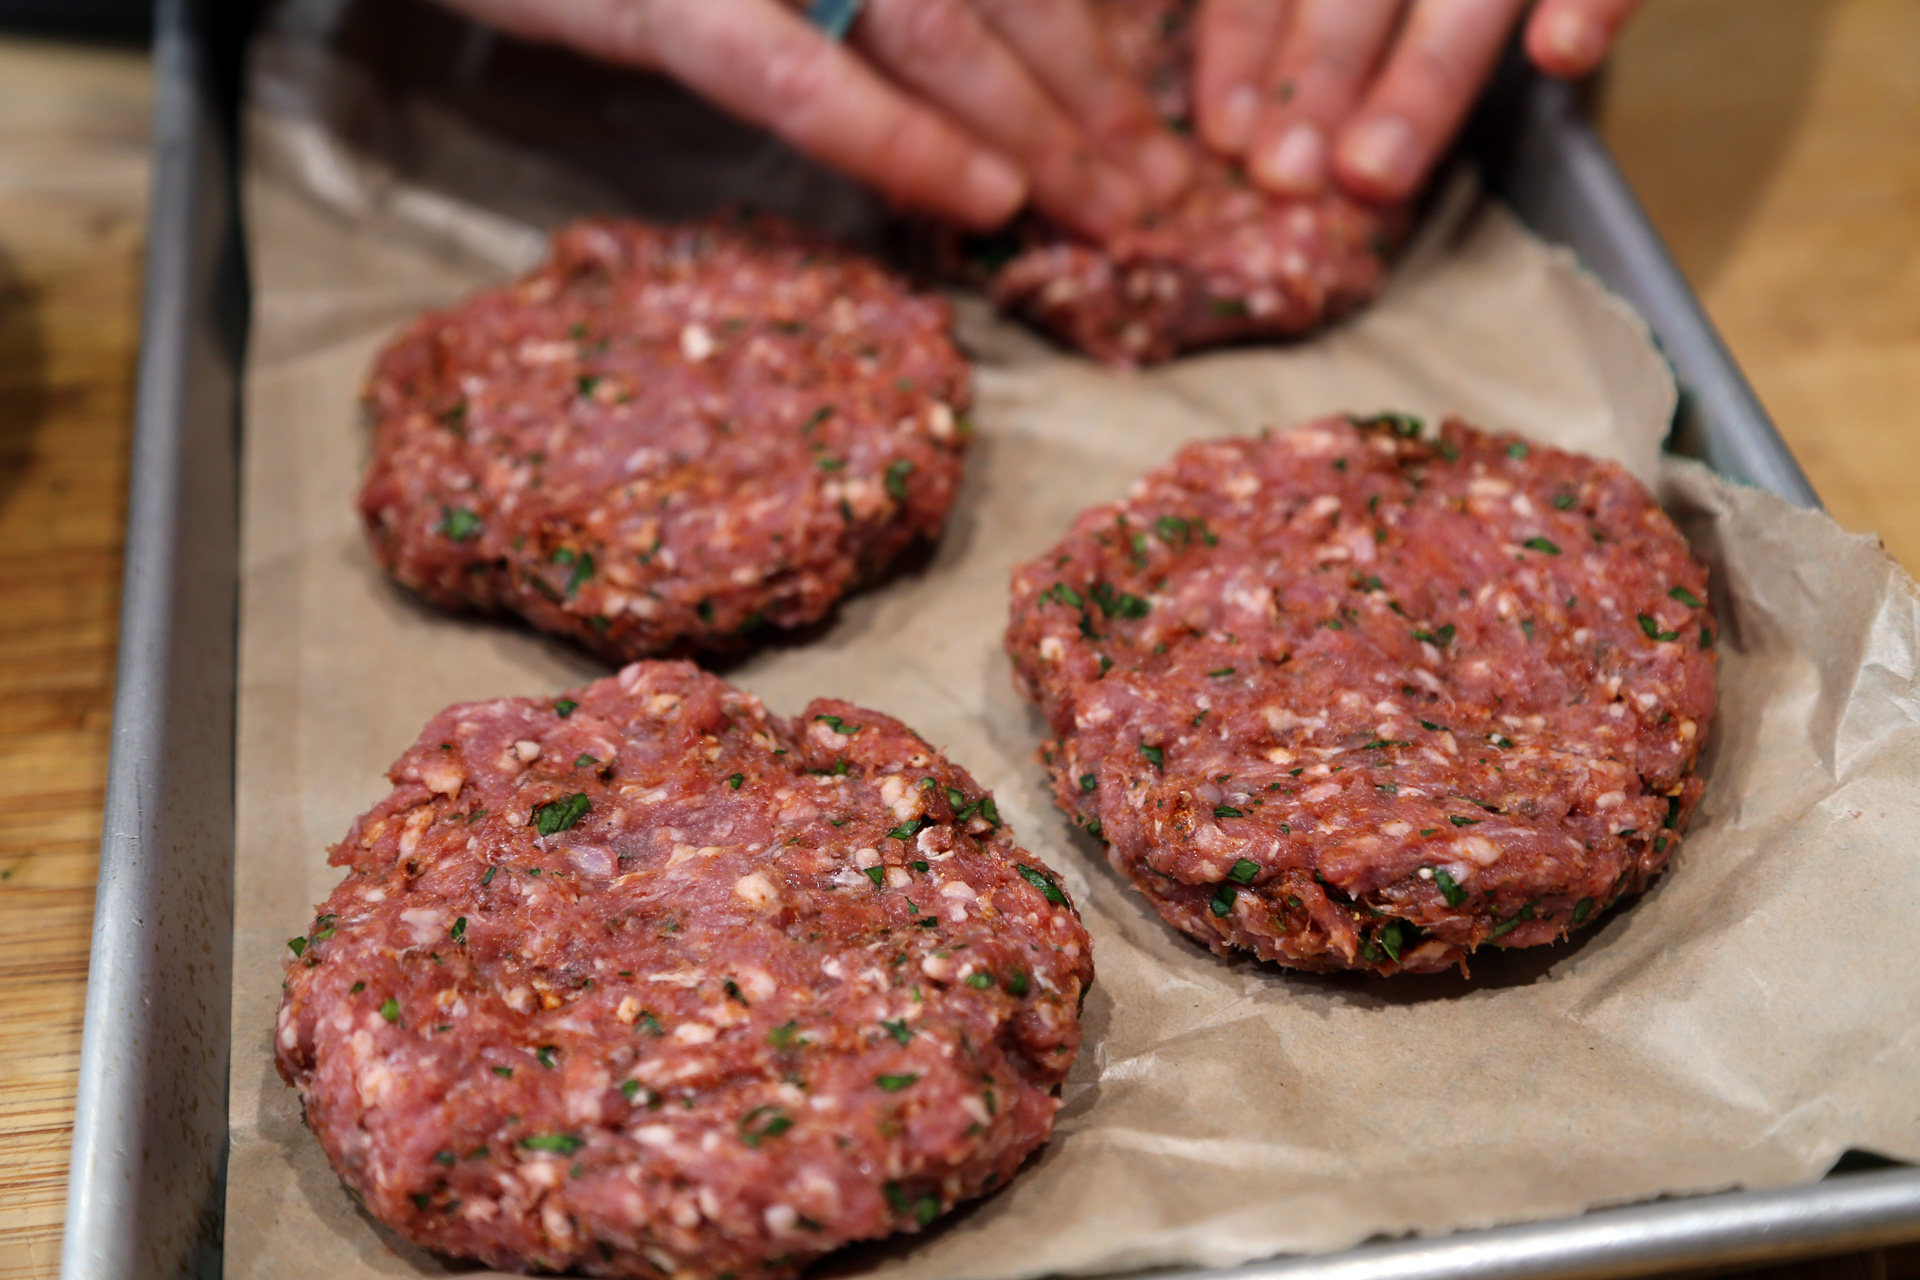 Form into 4 patties, each about 1/2 inch thick. Create a slight indentation in the center of the patty to keep it flat when it cooks.